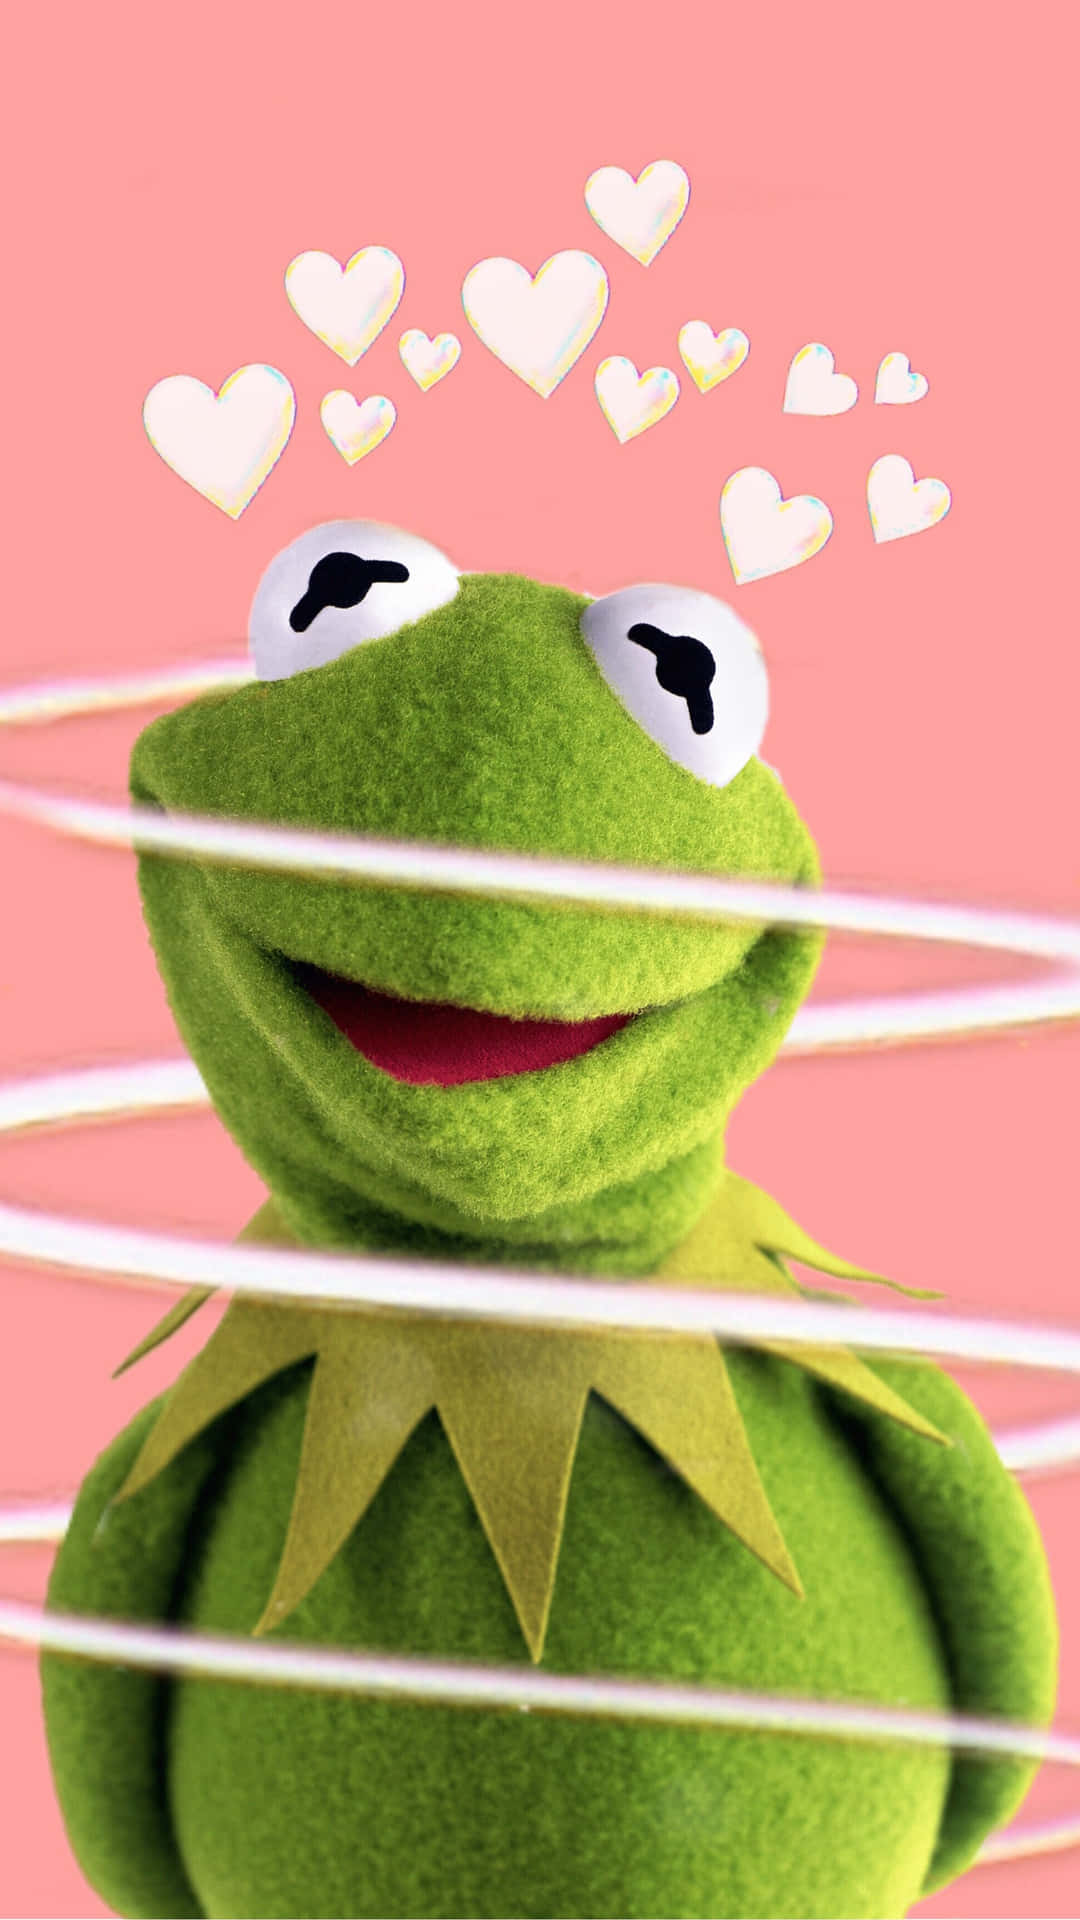 Kermit The Frog Hearts Wallpapers